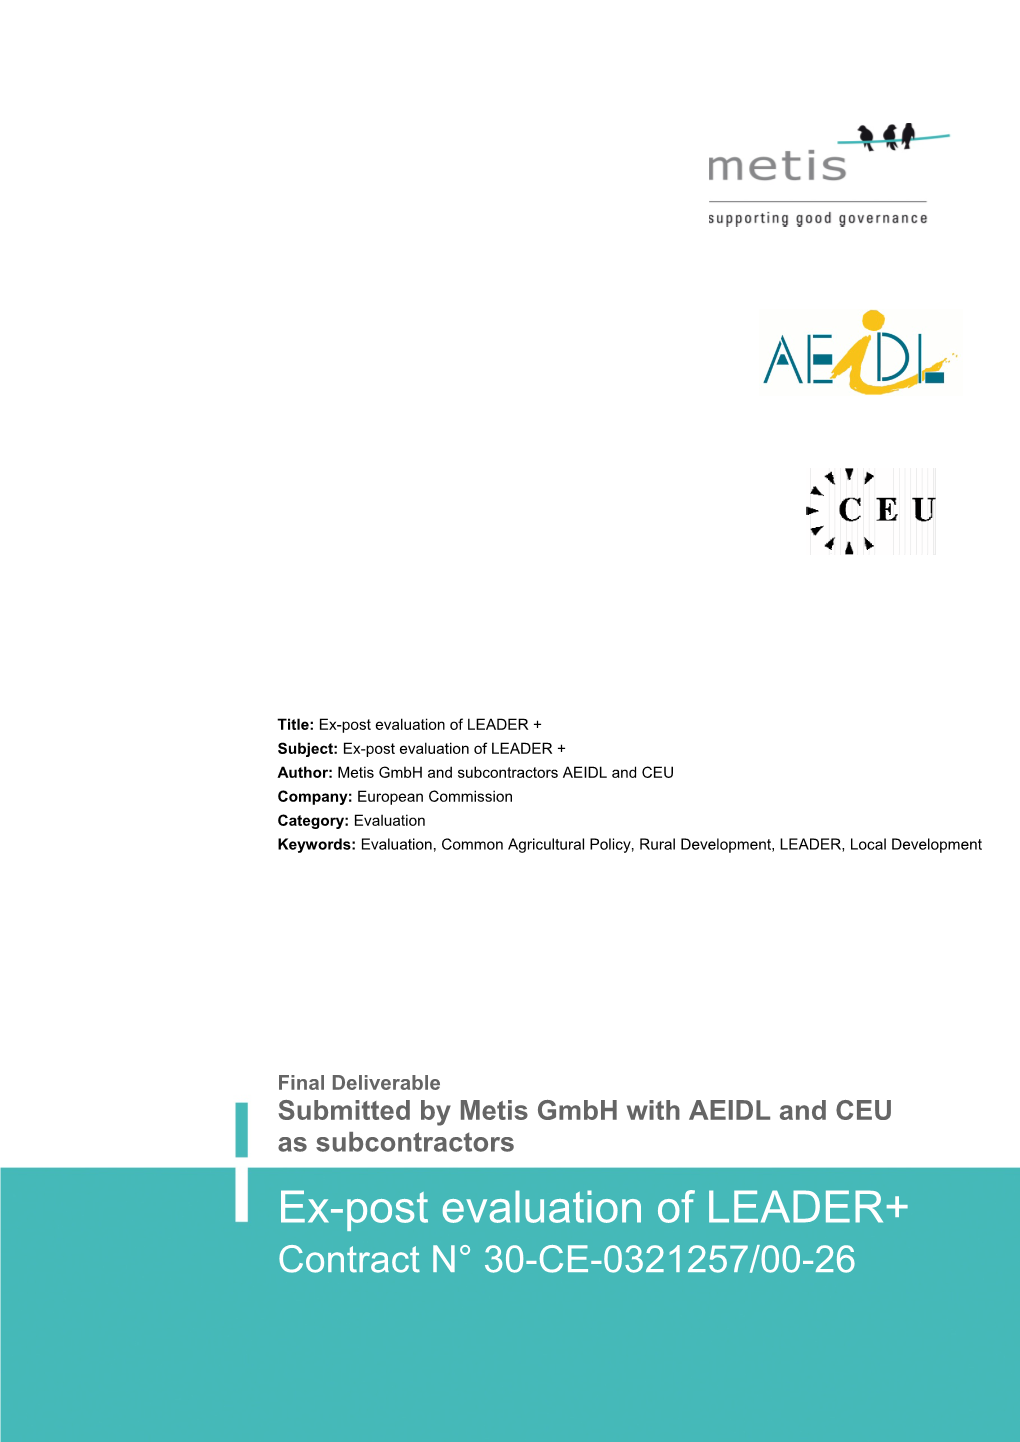 Ex-Post Evaluation of LEADER+ Contract N° 30-CE-0321257/00-26